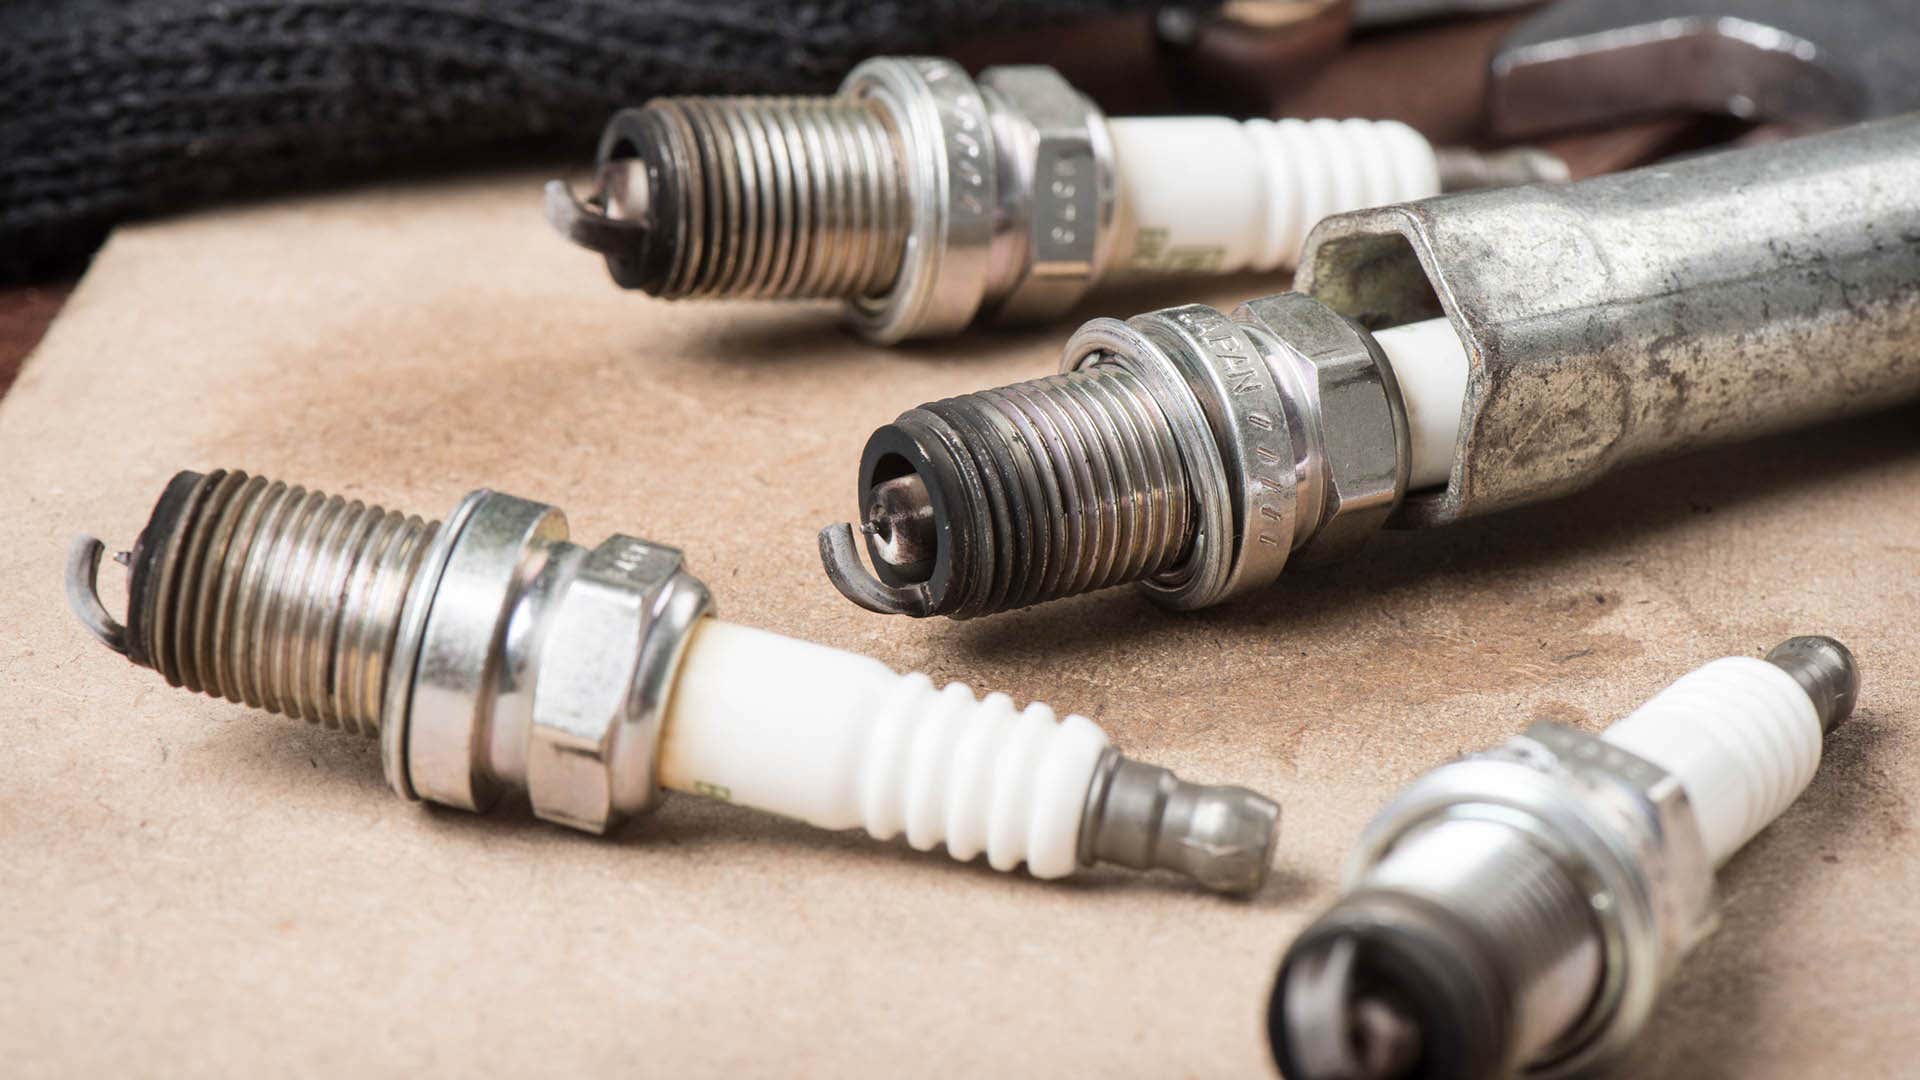 Used or bad spark plugs will often show dark wear near the tips.